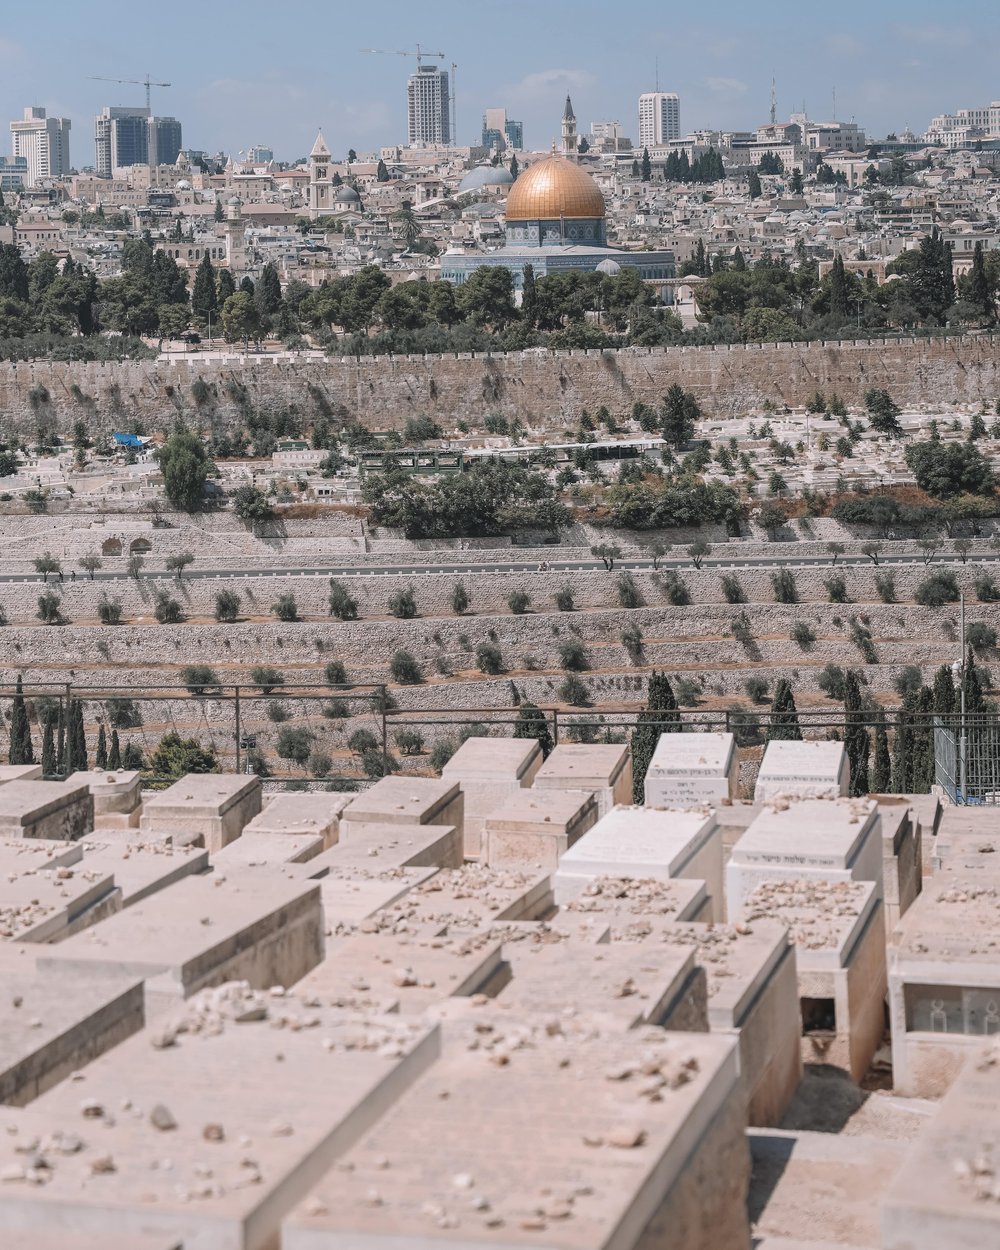 The Jewish Cemetery and Dome of the Rock - Old Town - Jerusalem - Israel